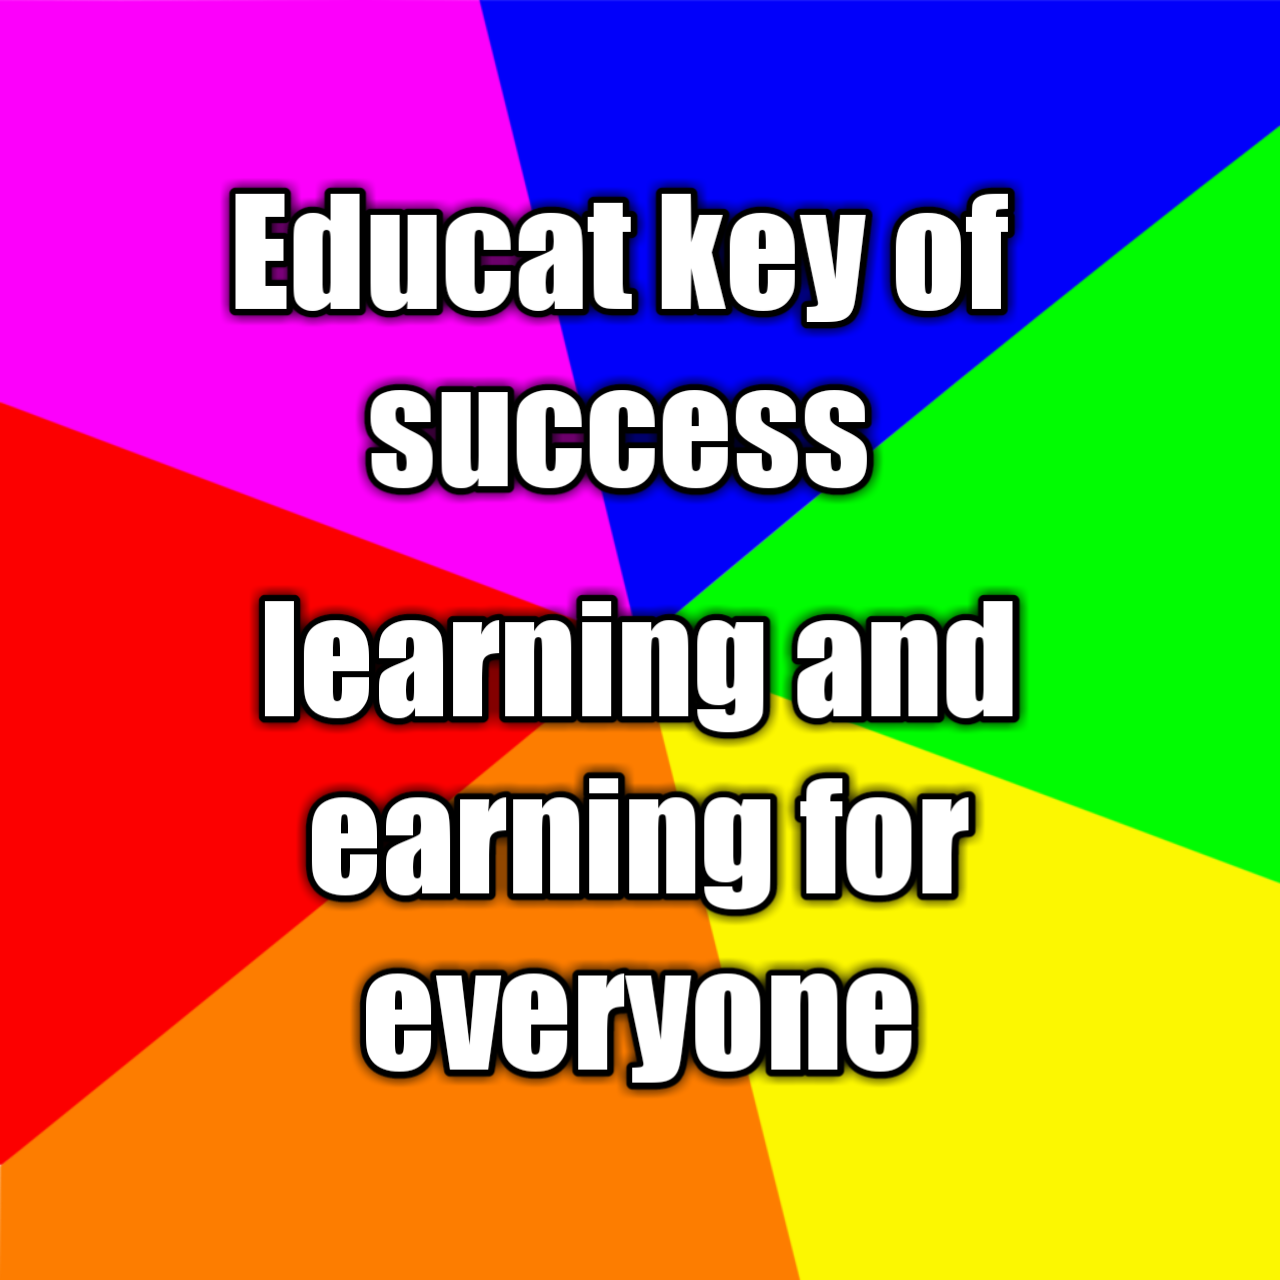 Education key of learning - healthyfood